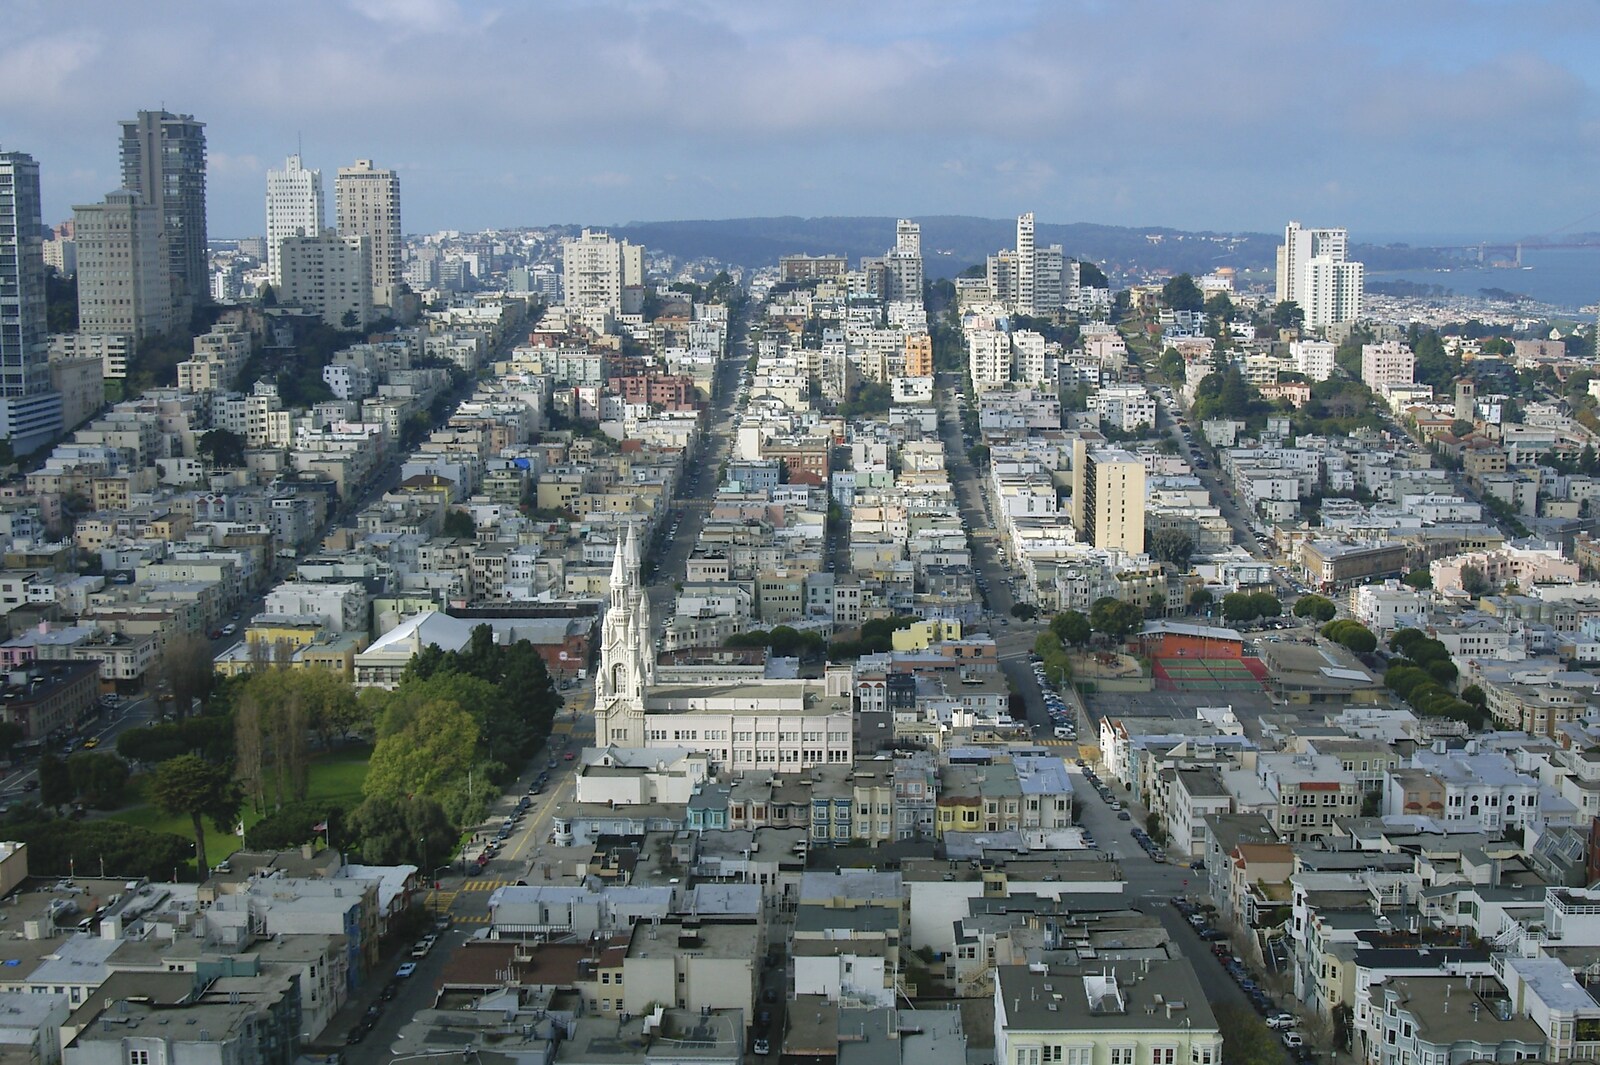 A view of a church from Coit Tower from Chinatown, Telegraph Hill and Fisherman's Wharf, San Francisco, California, US - 11th March 2006